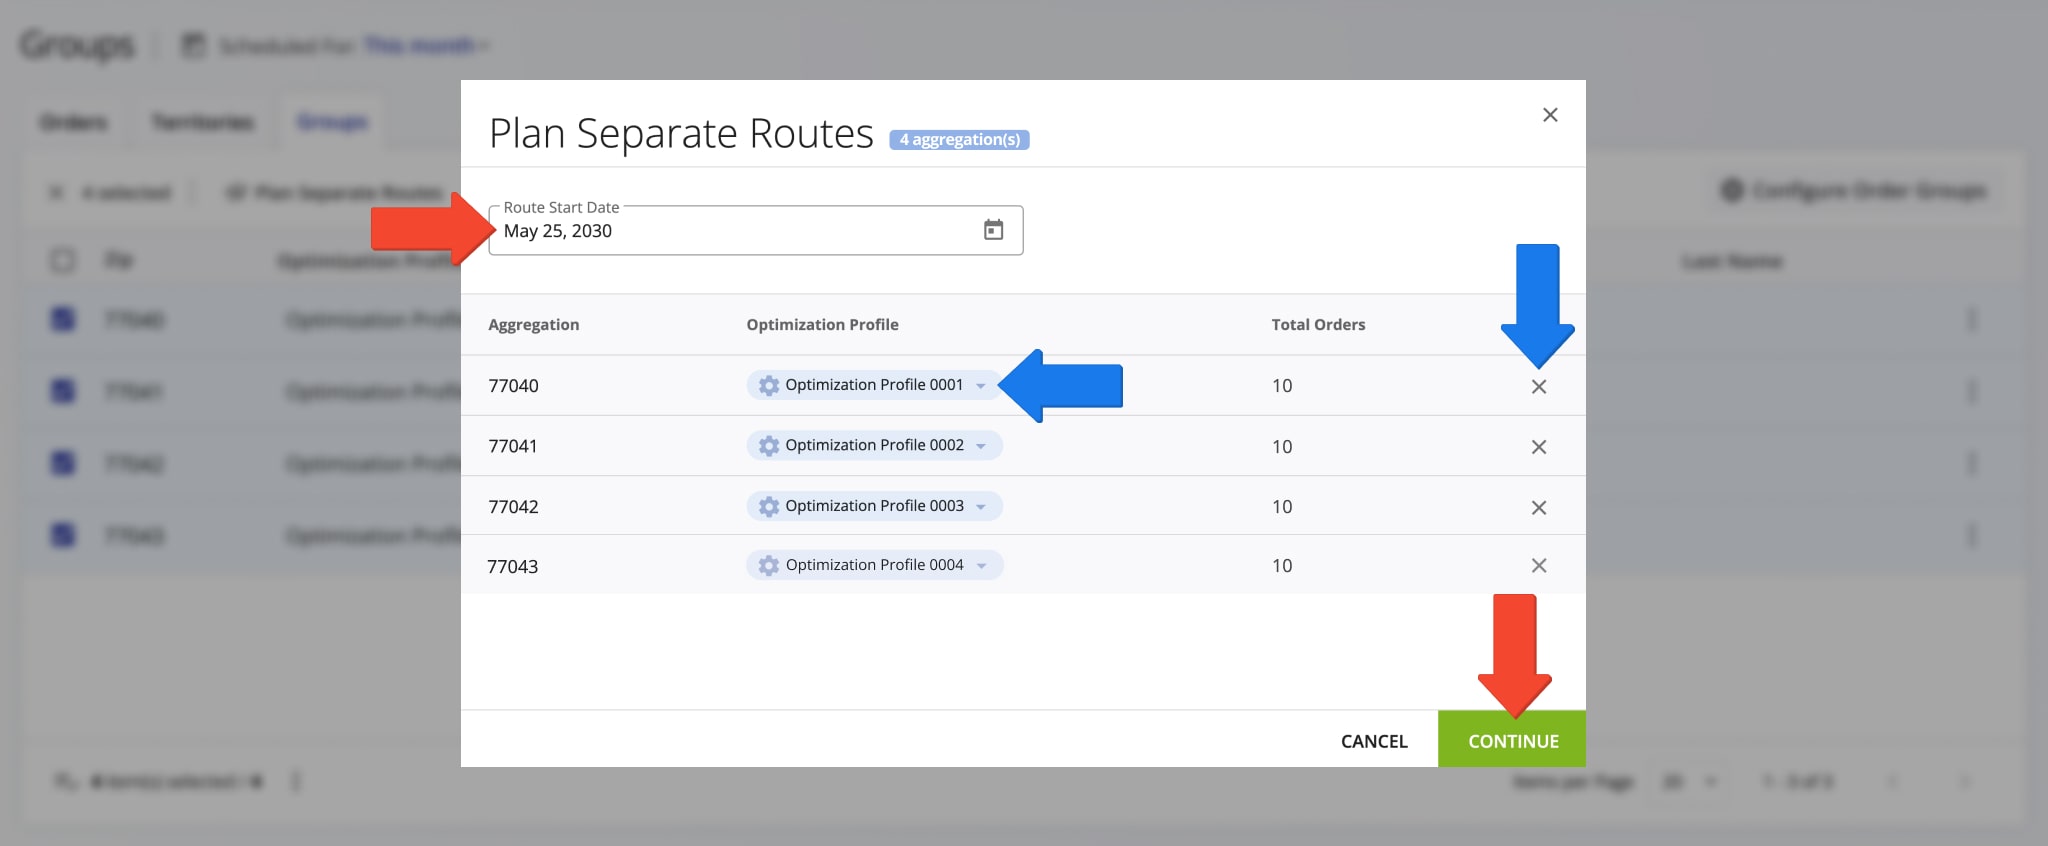 Scheduling separate routes for planning and optimizing one or multiple routes with orders within each selected group.